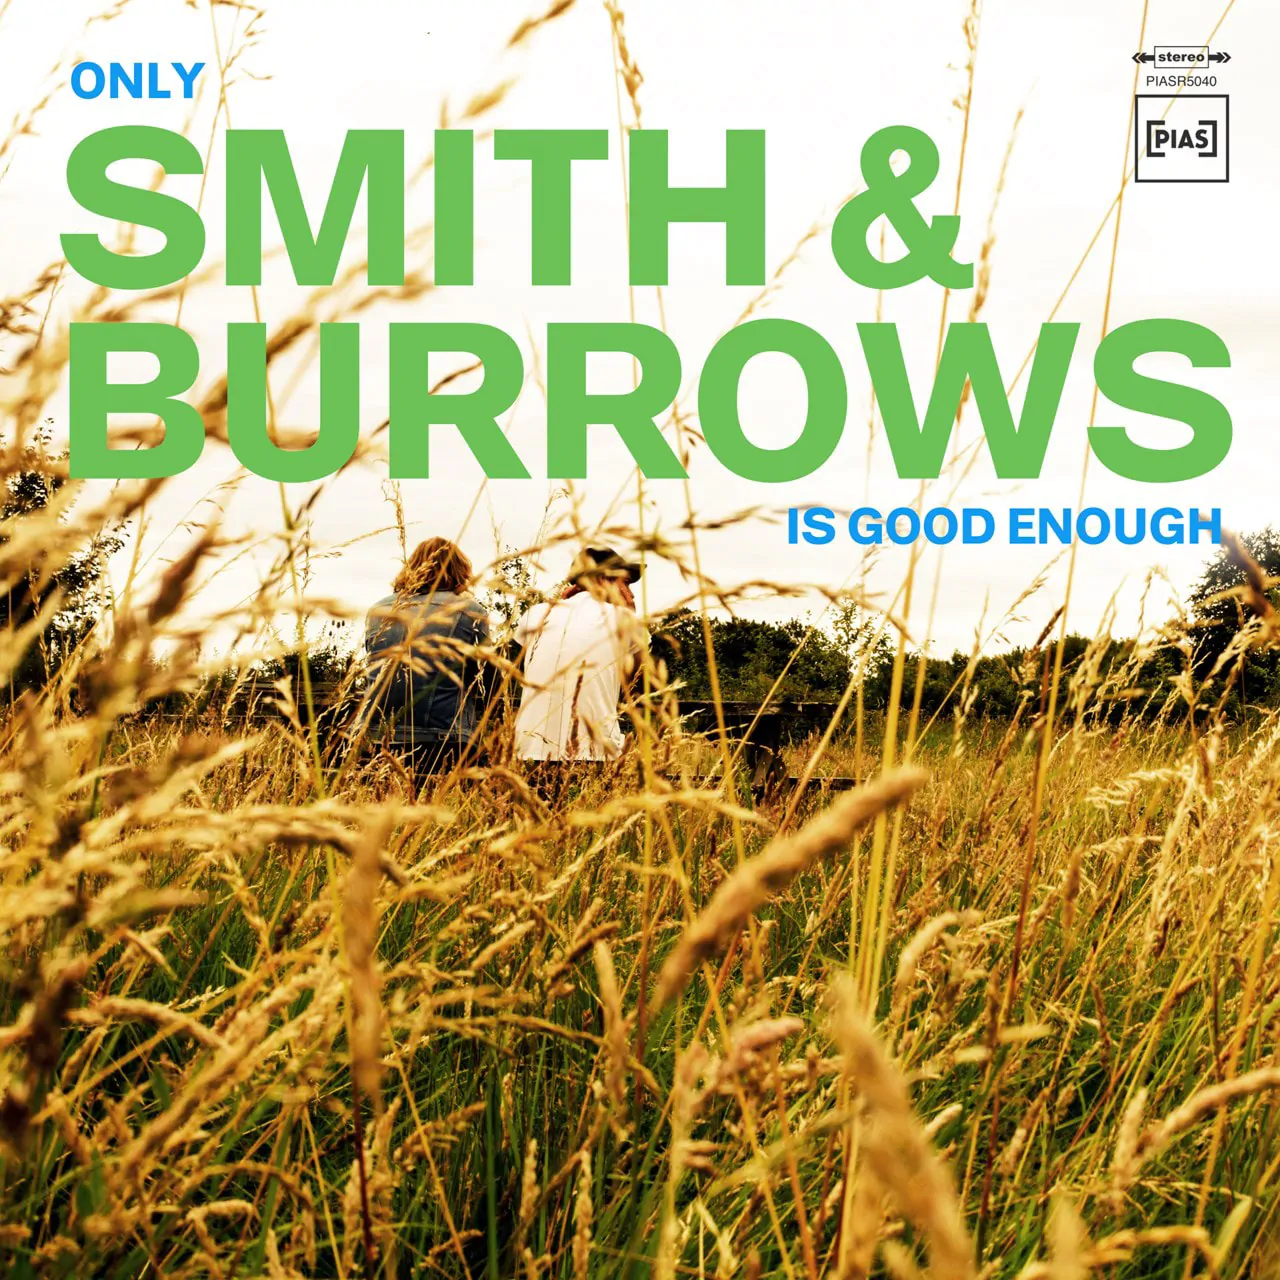 ALBUM REVIEW: Smith & Burrows – Only Smith & Burrows Is Good Enough